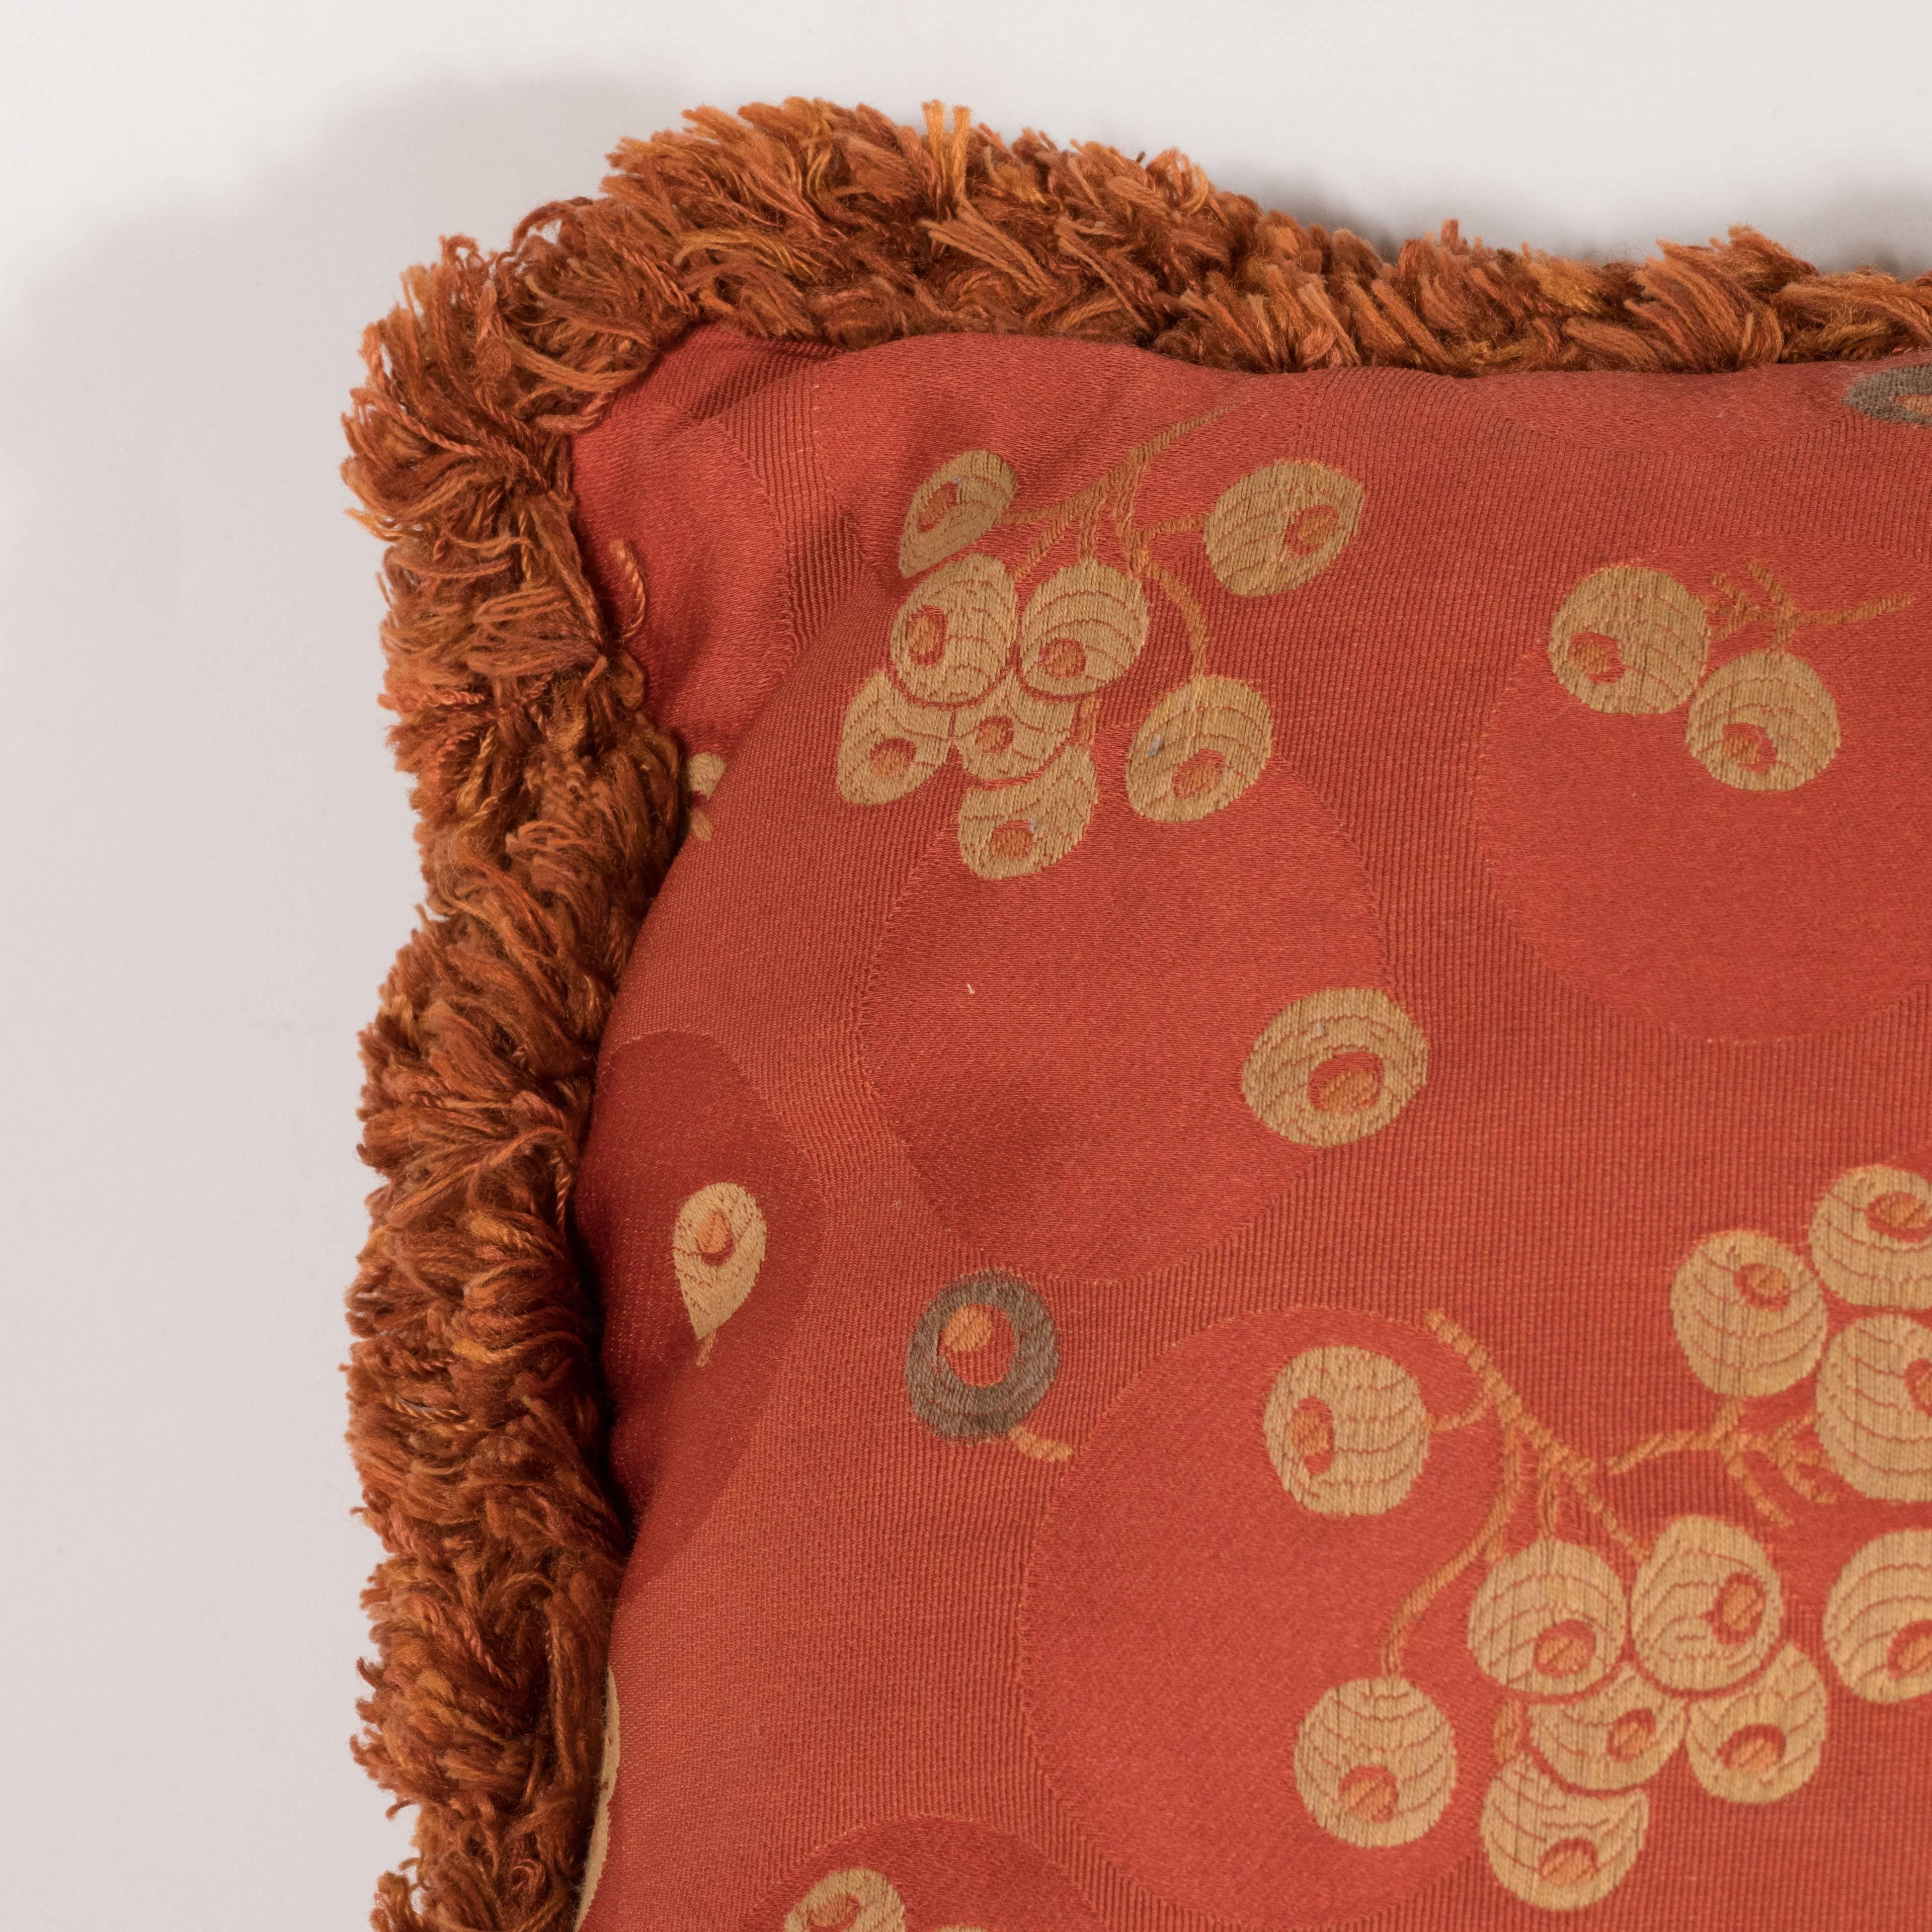 Contemporary Pair of Modernist Carnelian Red and Tan Japonisme Inspired Pillows